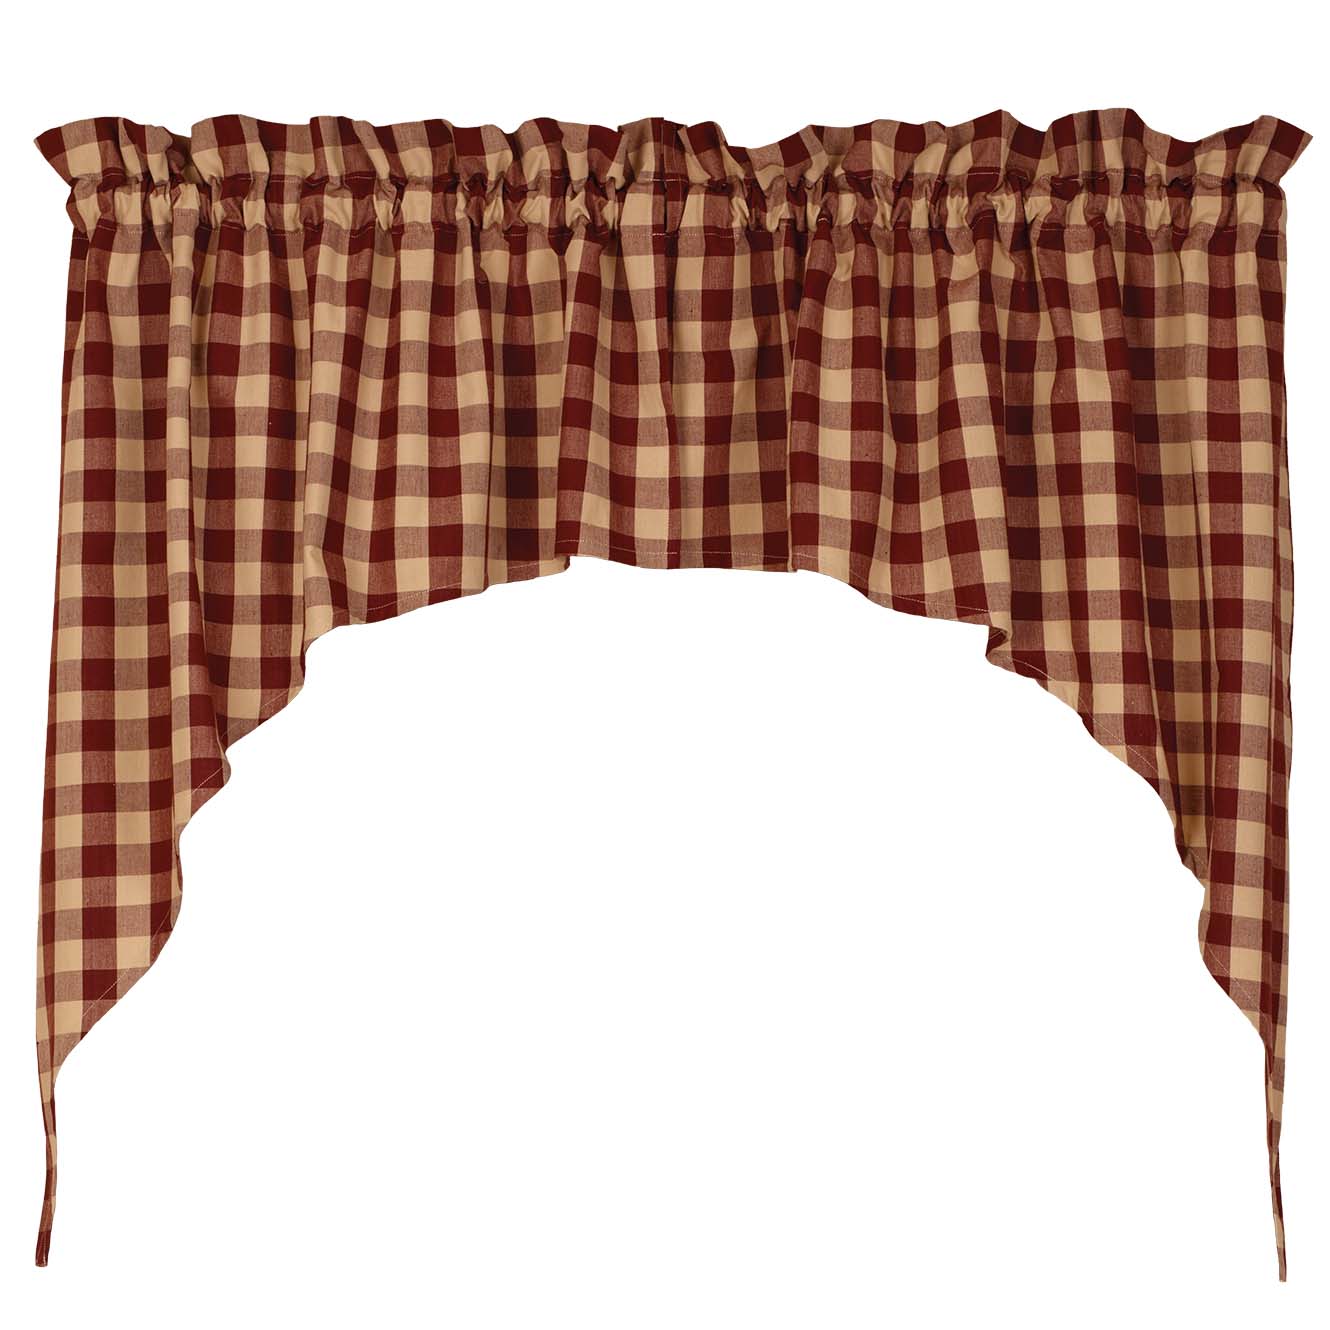 Details about   Barn Red Salem Plaid Valance Country Farmhouse Window Lined 72WX15.50L 